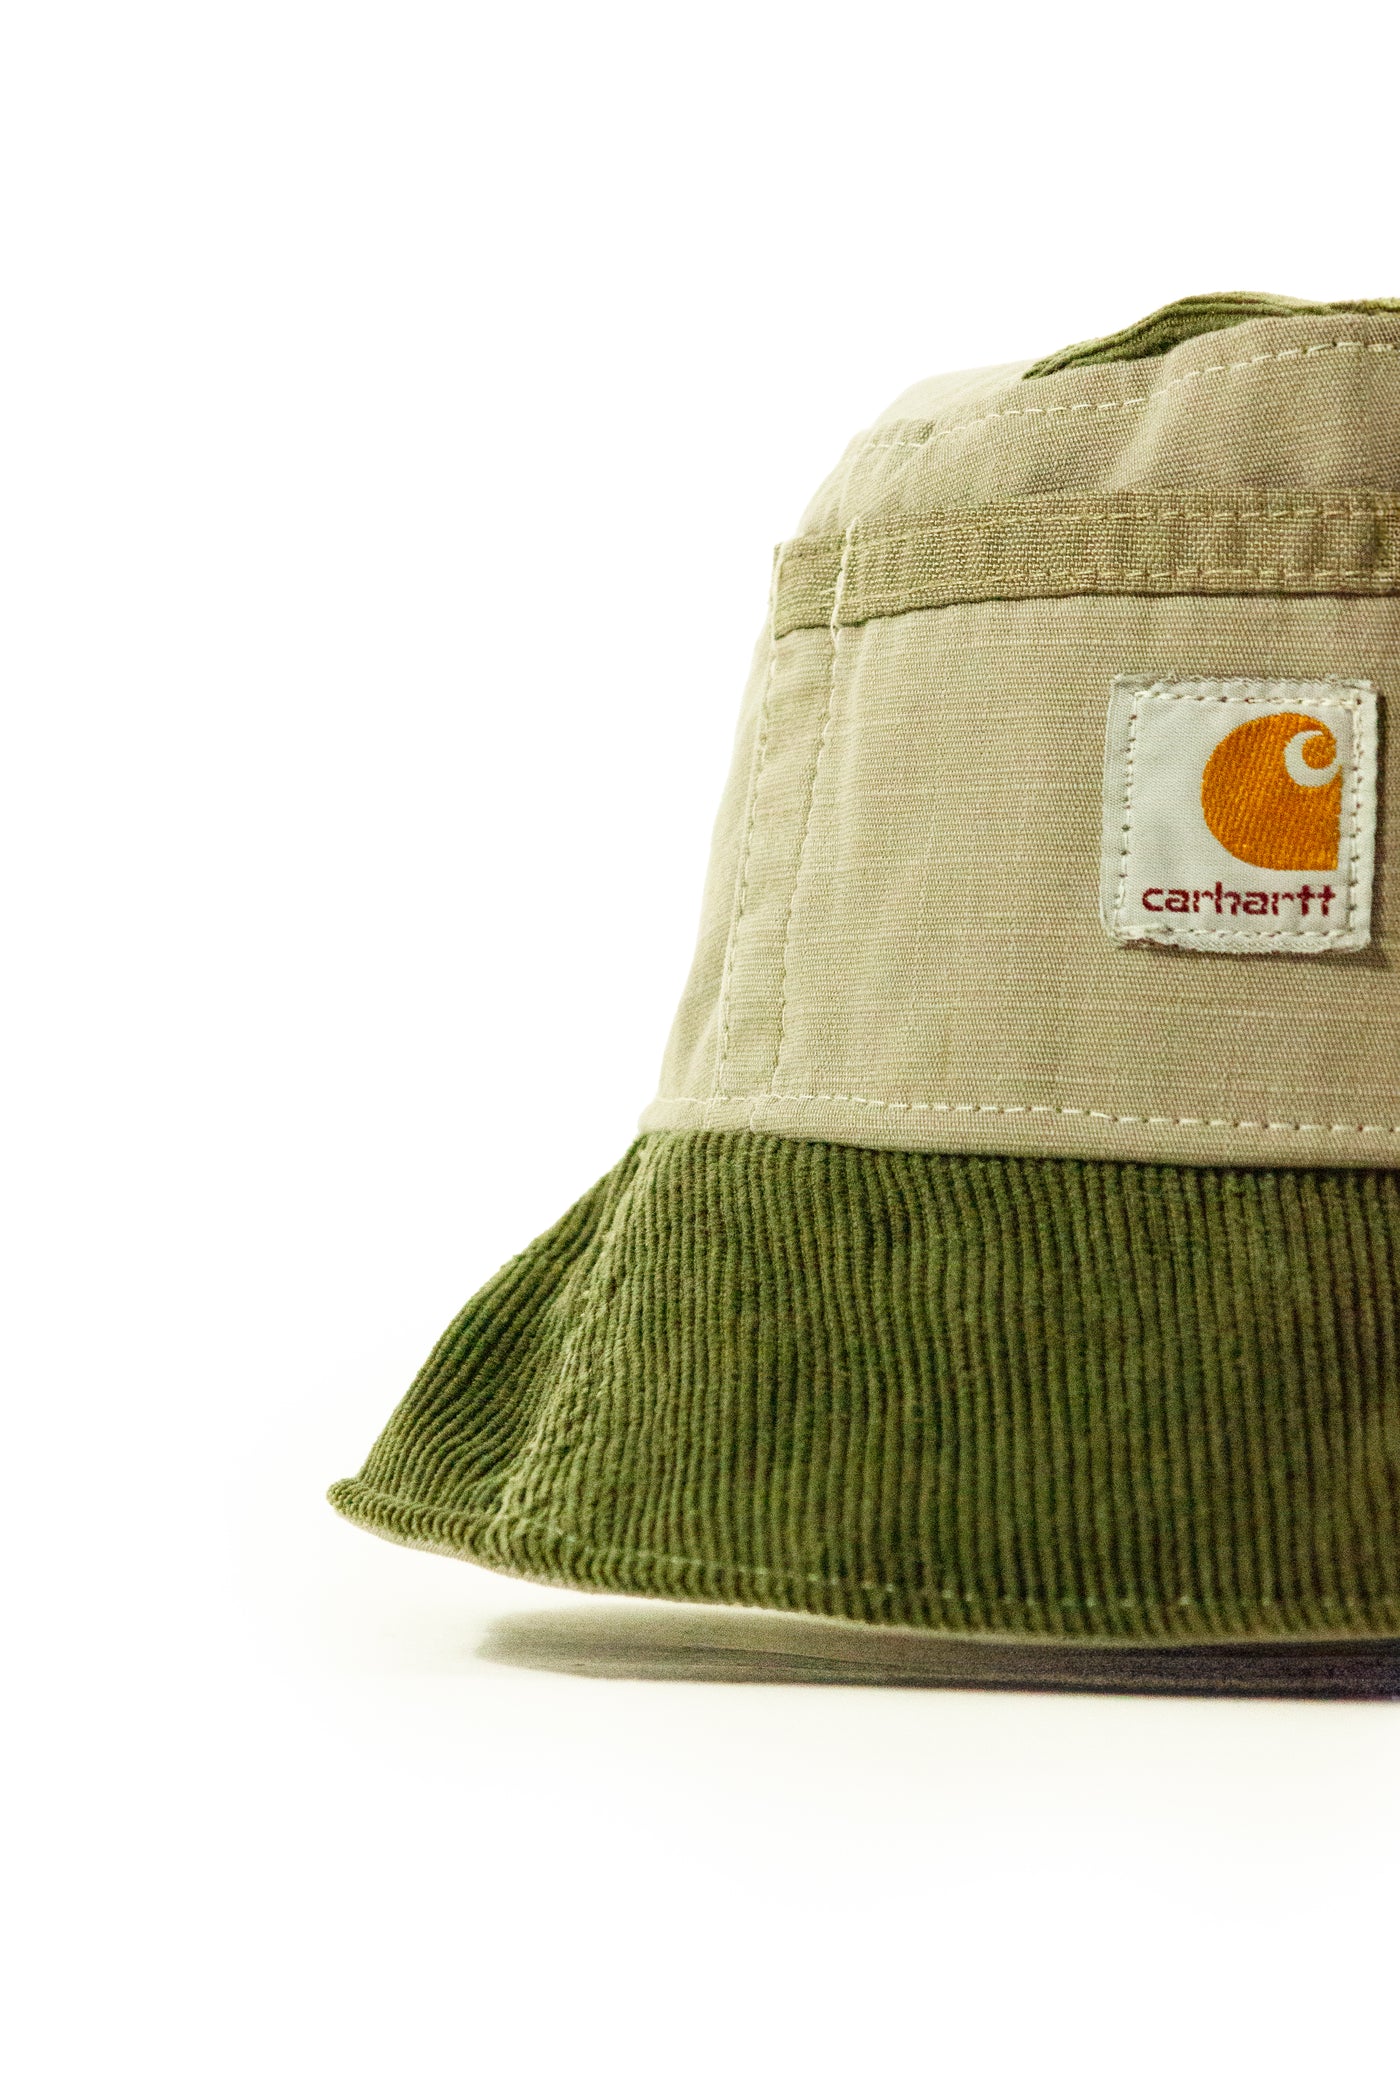 Vintage Upcycled Bucket Hat